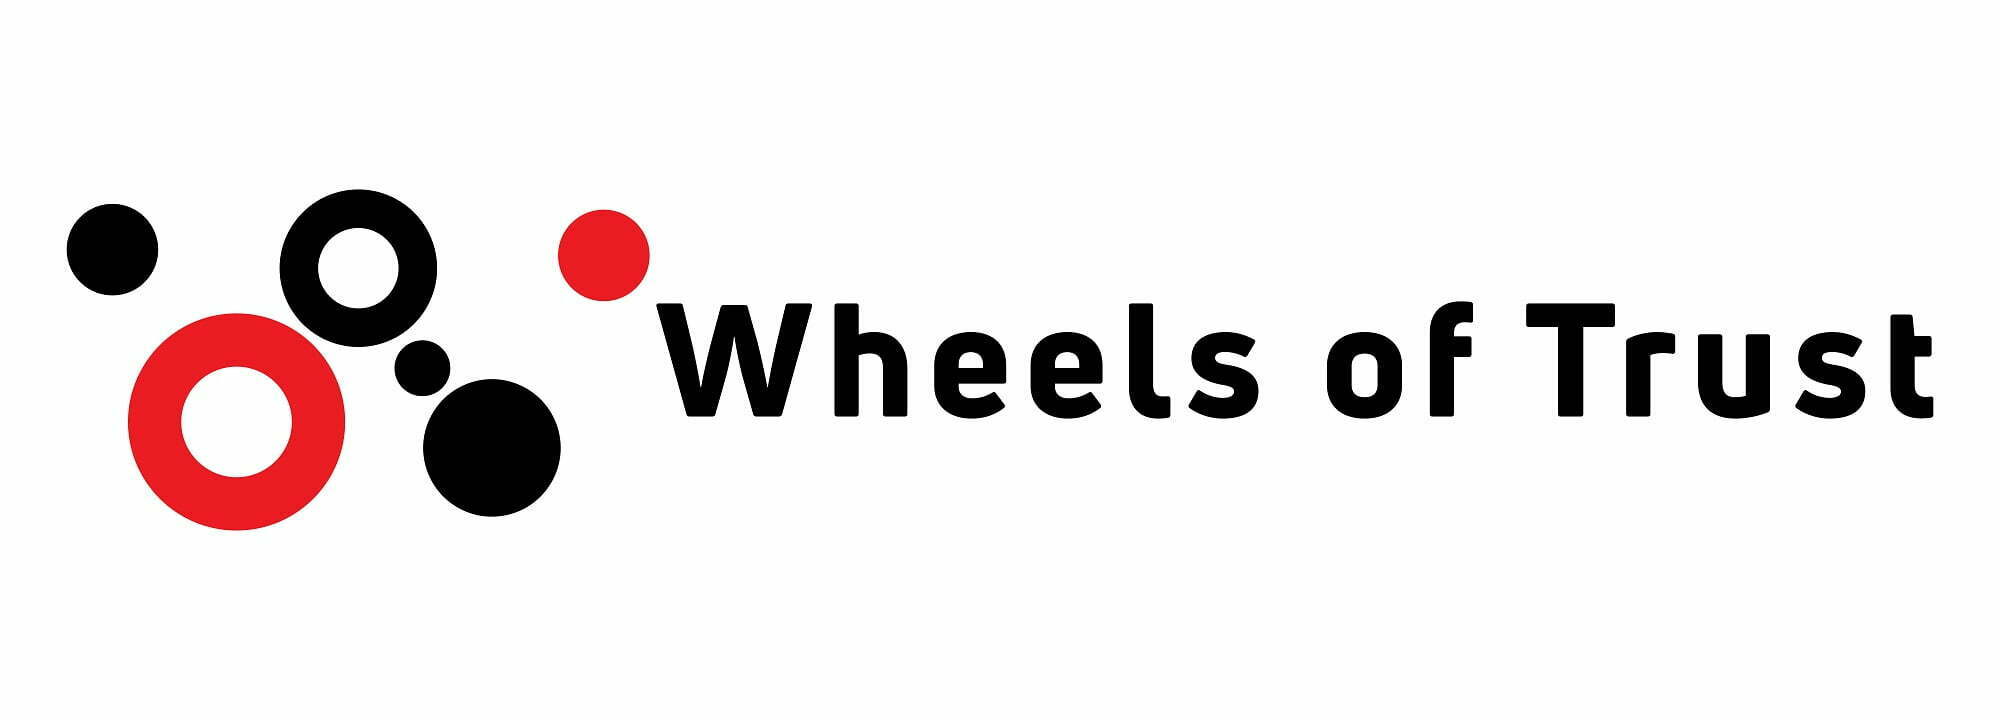 Hero MotoCorp Resale Platform “Wheels of Trust Launched In A Phygital Avatar